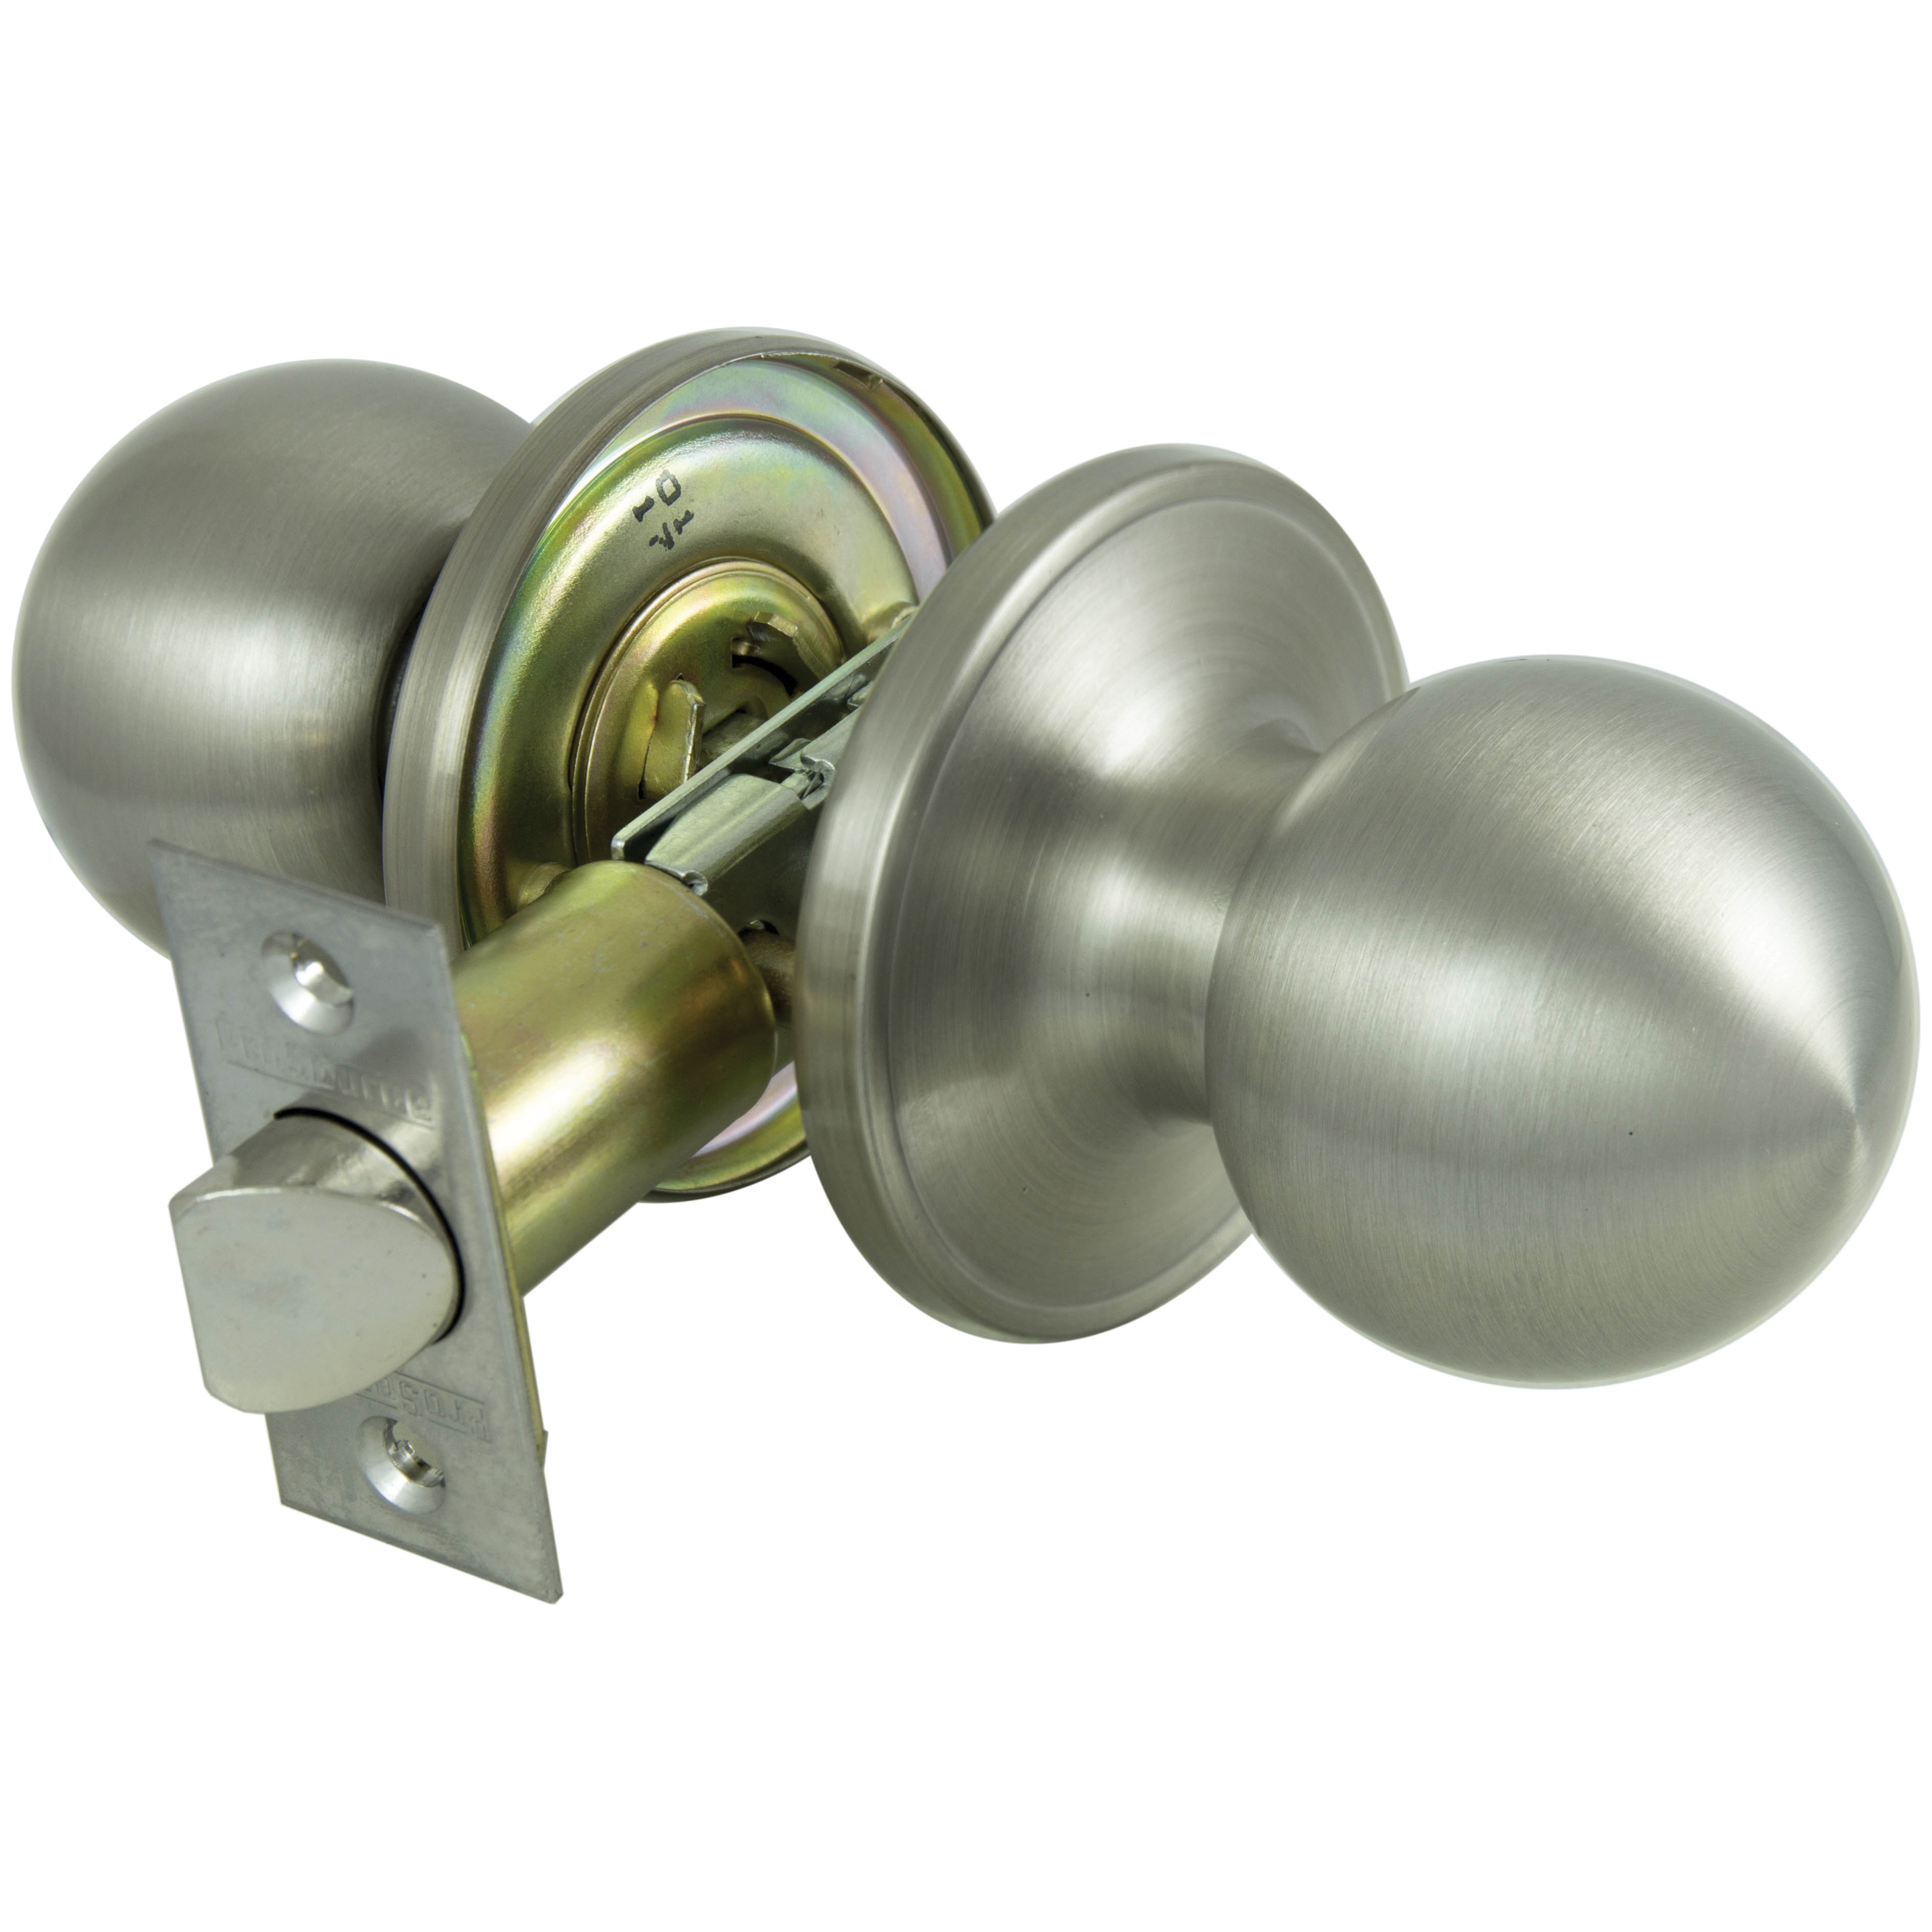 T3P30V-PS Passage Knob, Metal, Satin Nickel, 2-3/8 to 2-3/4 in Backset, 1-3/8 to 1-3/4 in Thick Door